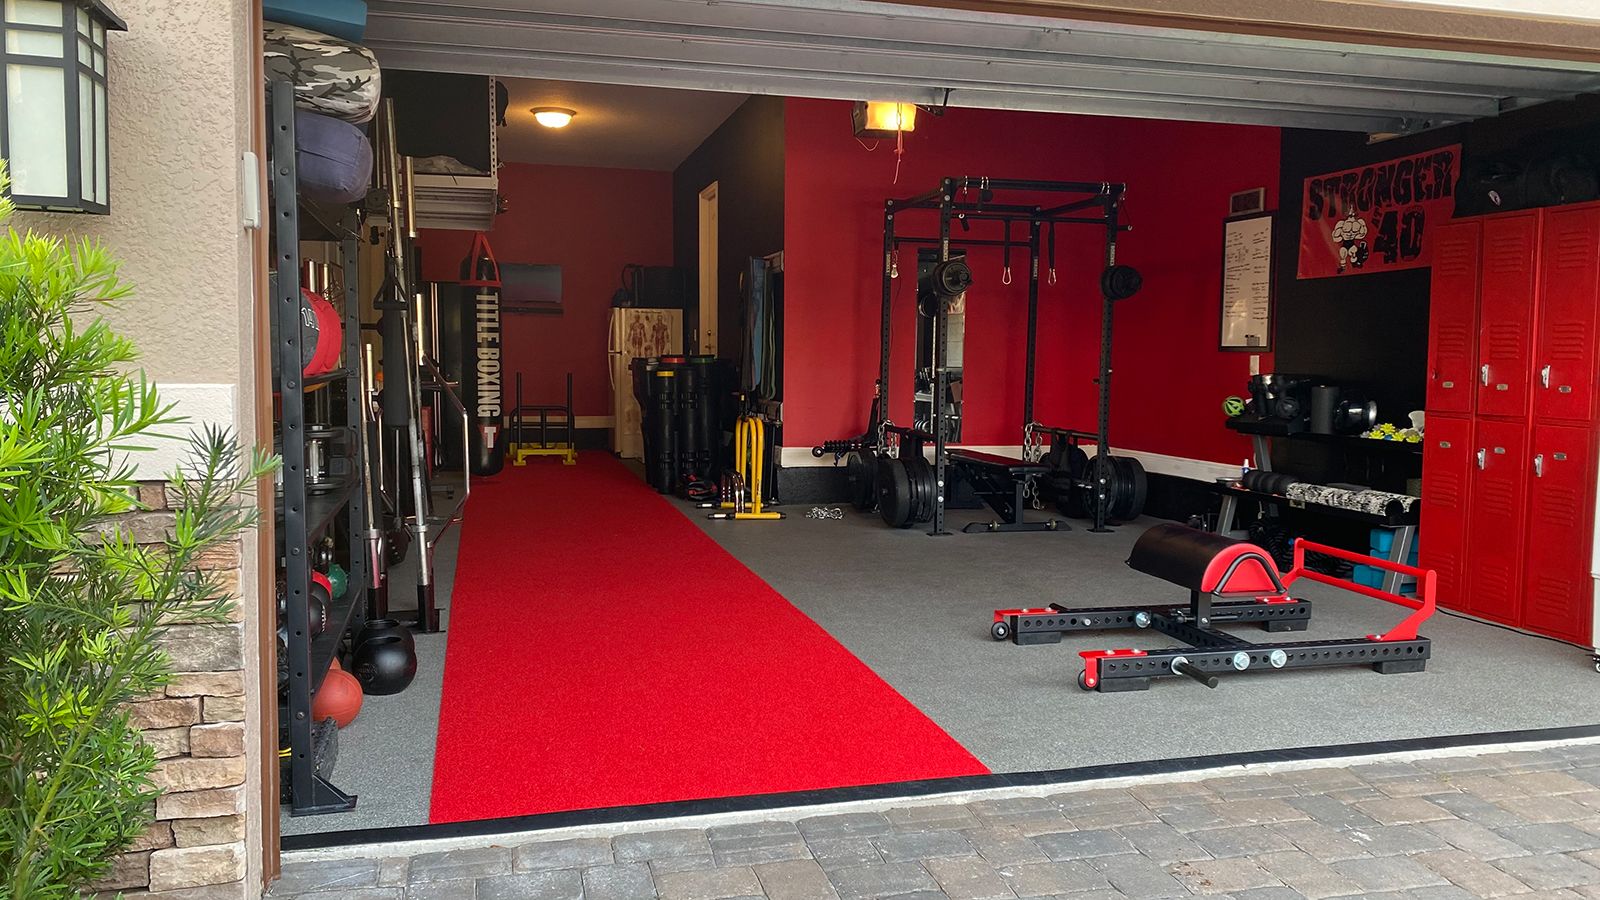 How to set up a home gym space that works for you